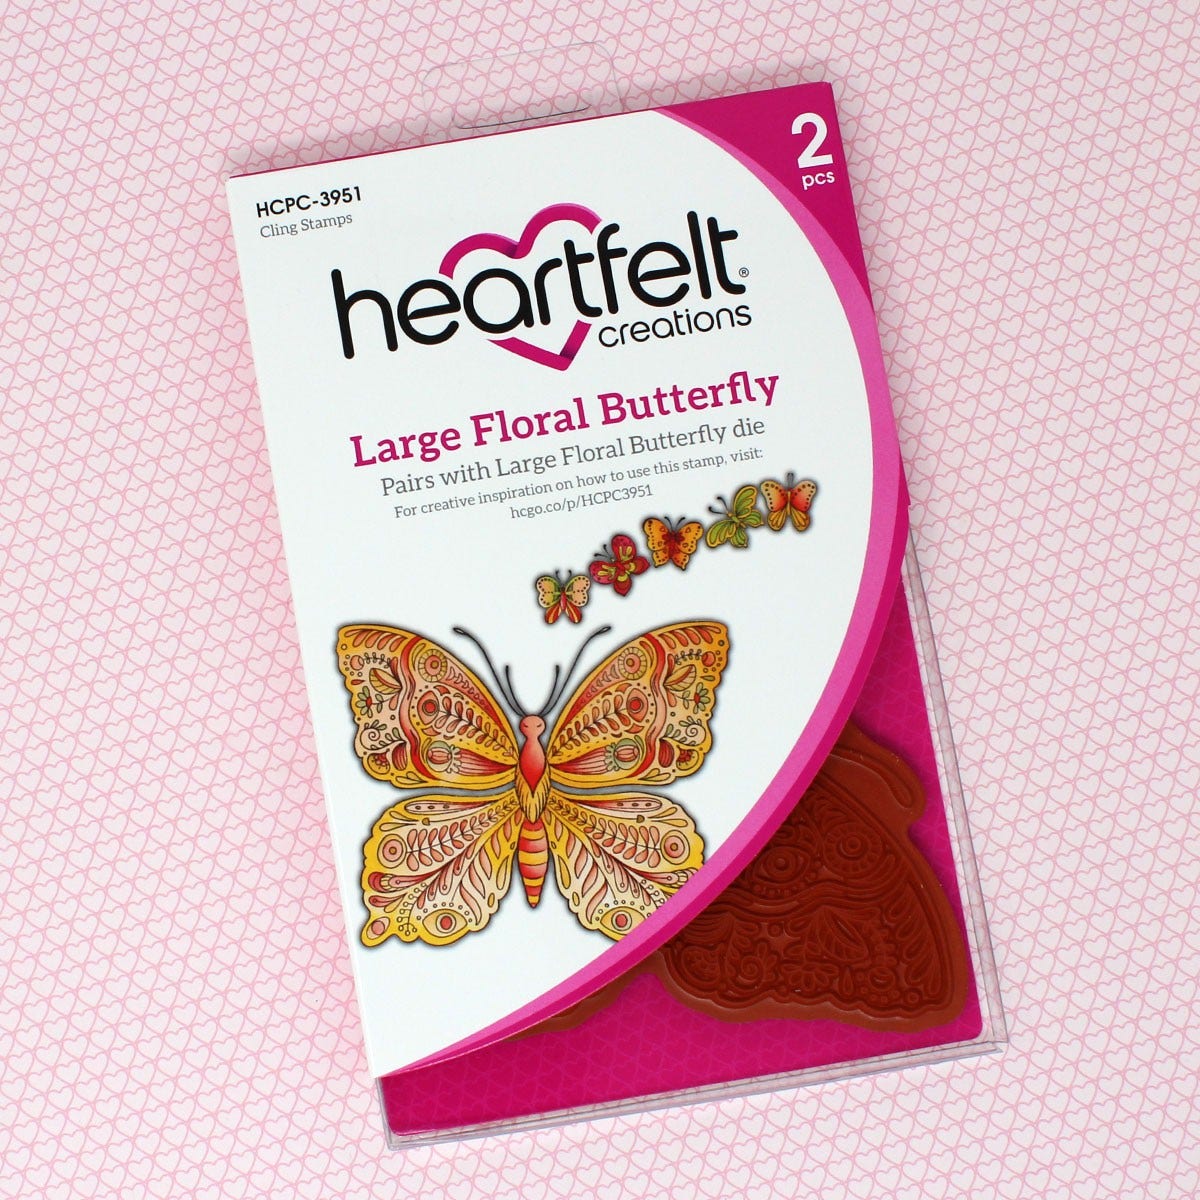 Heartfelt Creations - Large Floral Butterfly Cling Stamp Set